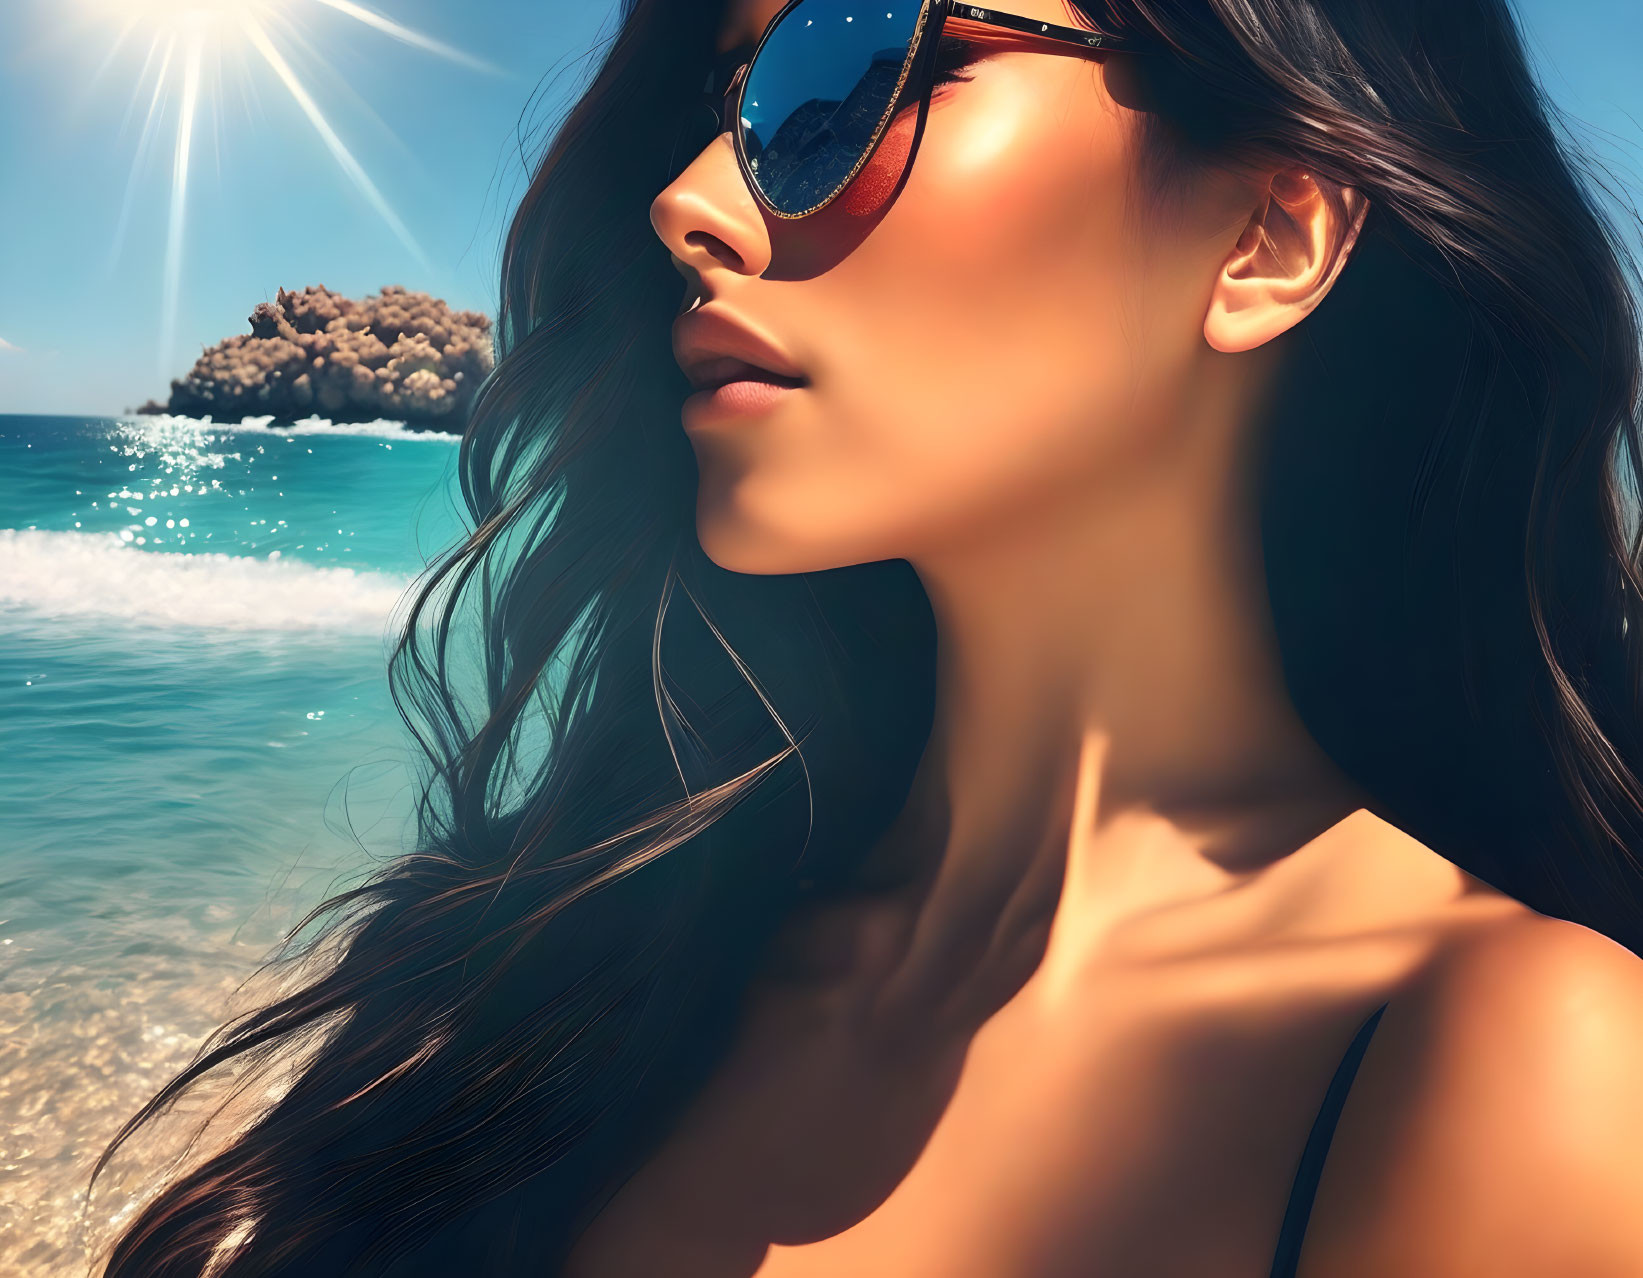 Woman with Long Hair in Sunglasses on Sunny Beach with Blue Water and Rocky Island